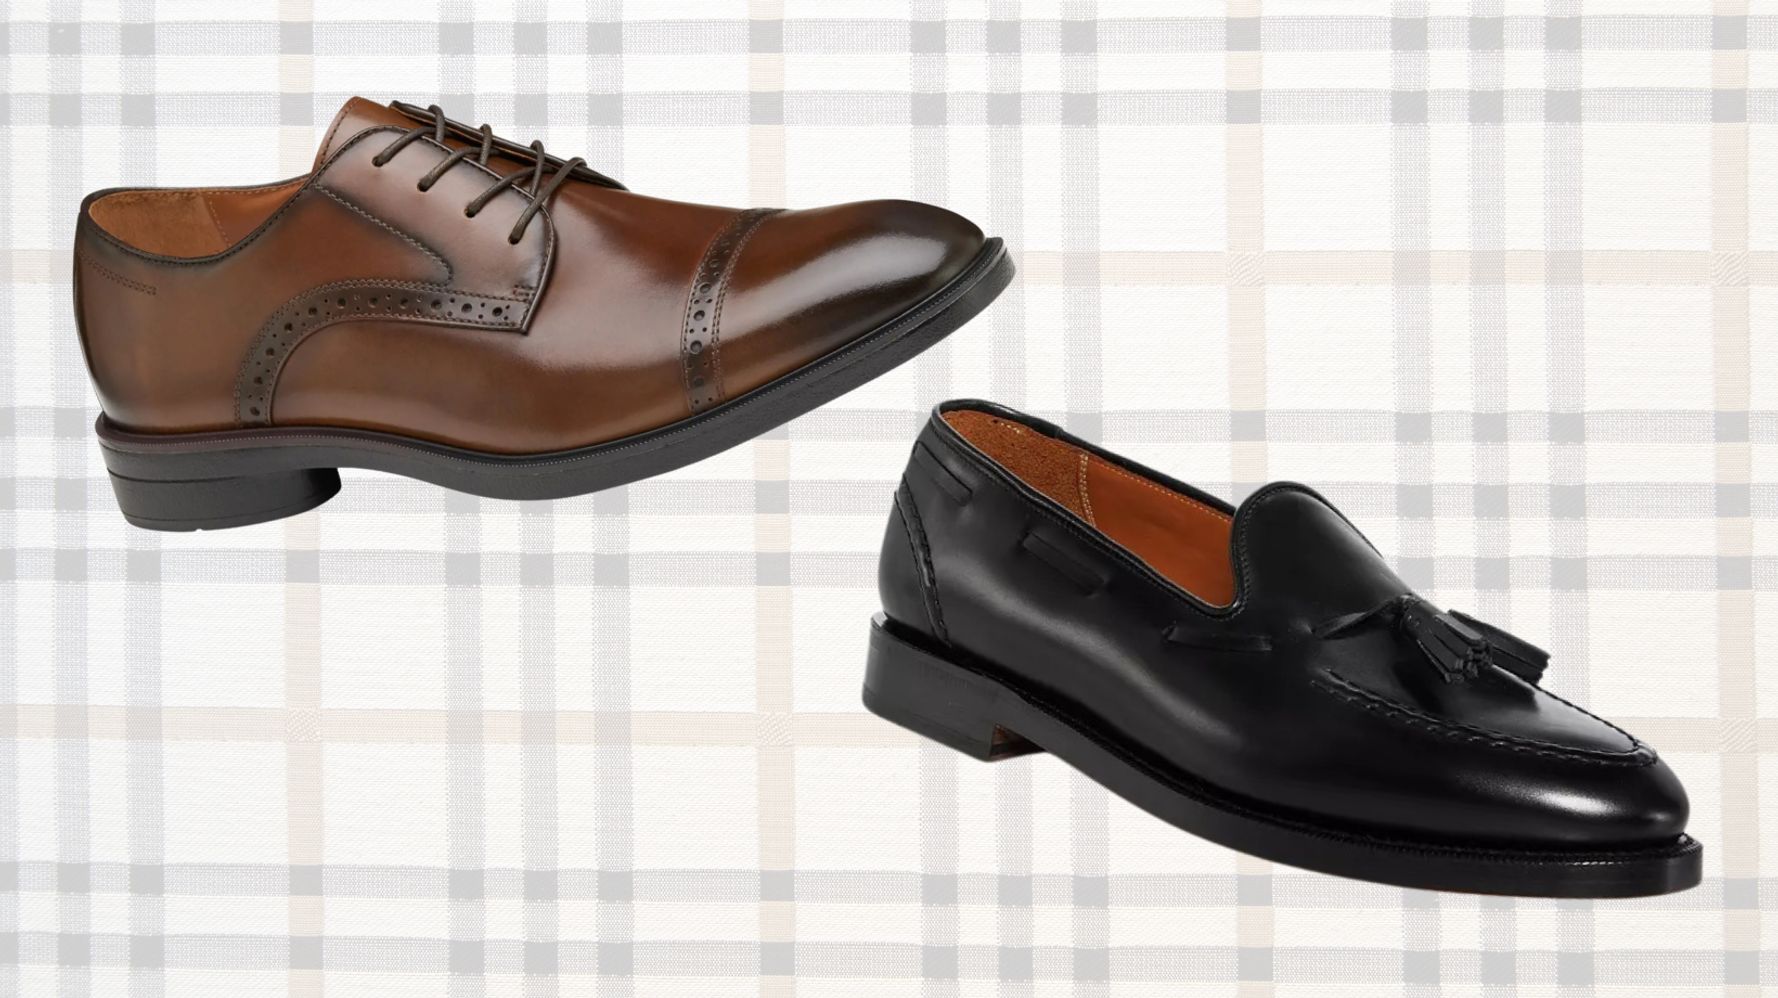 20 Style Tips On How To Wear Oxford Shoes  How to wear oxford shoes,  Fashion, Oxford shoes outfit